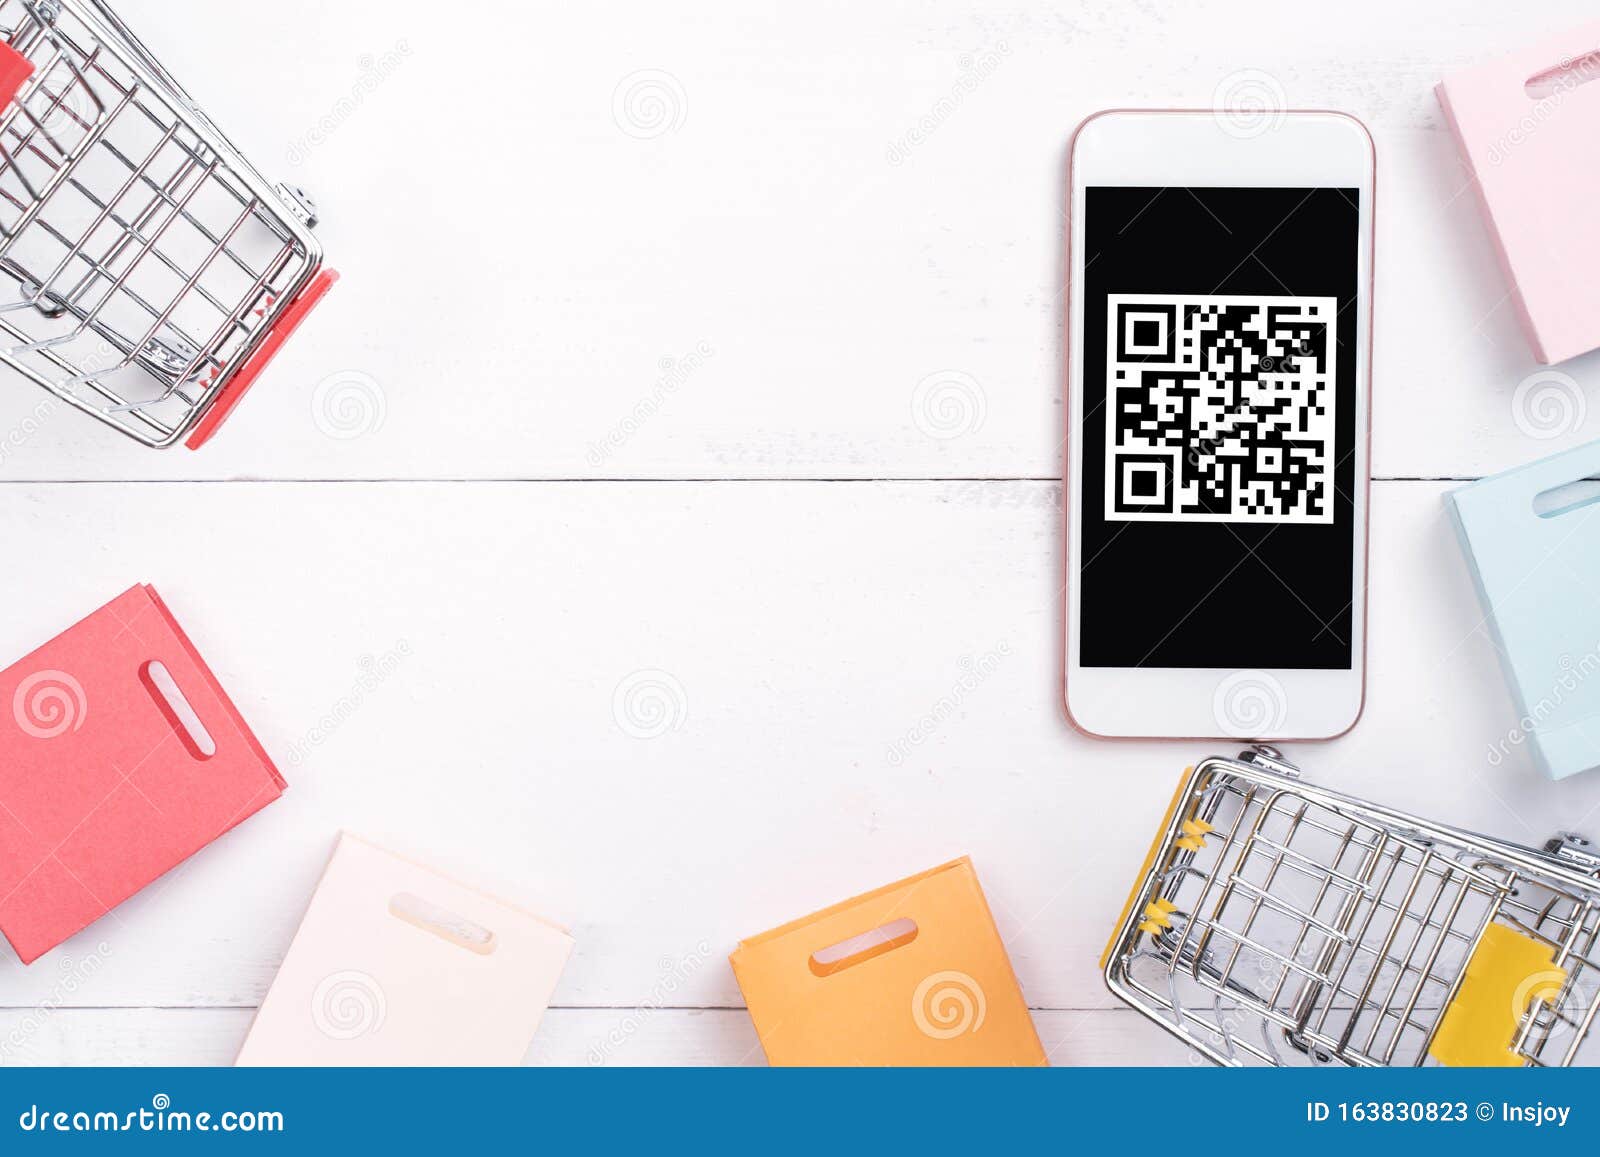 Abstract Online Shopping, Mobile Payment With QR Code